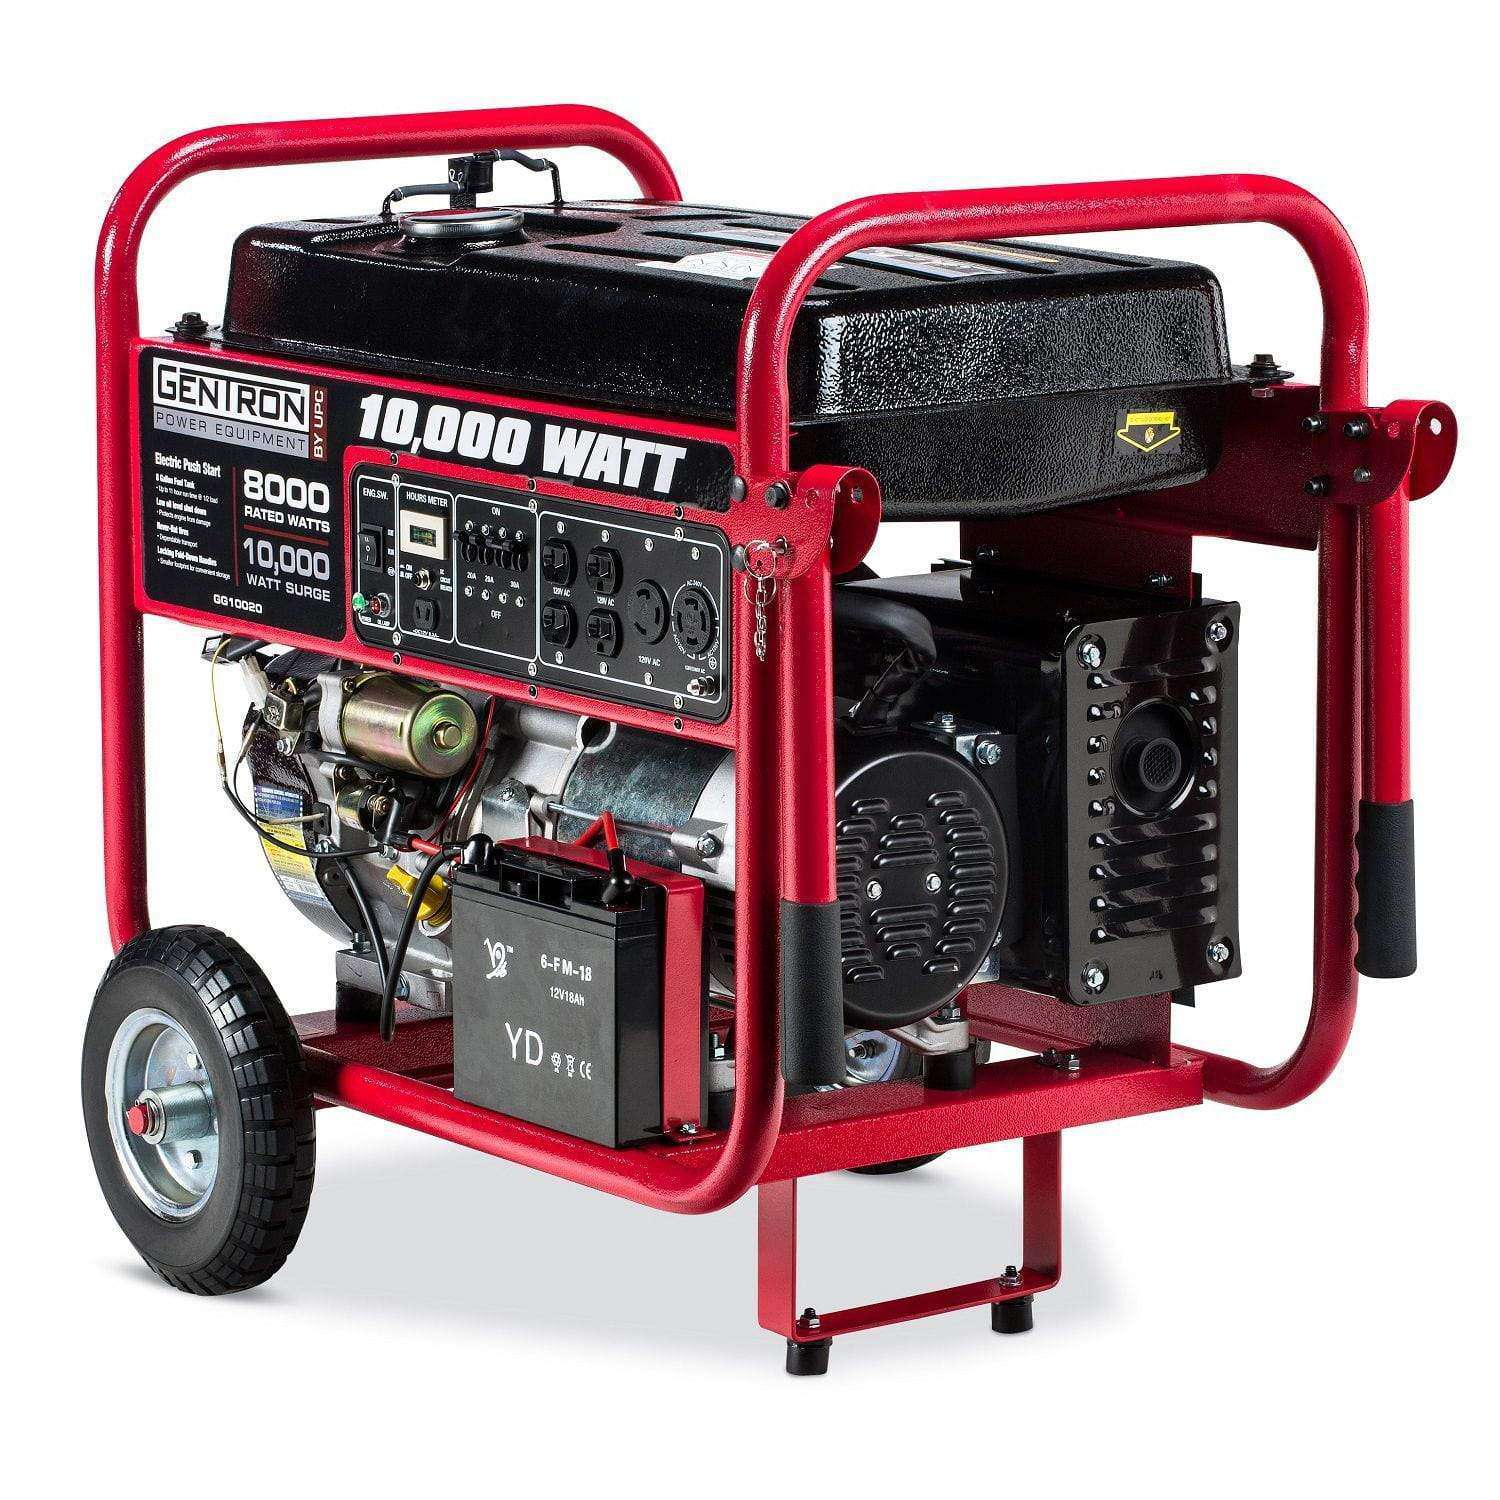 Gentron GG10020C 8000W/1000W Electric Start Portable Gas Generator Carb Compliant New